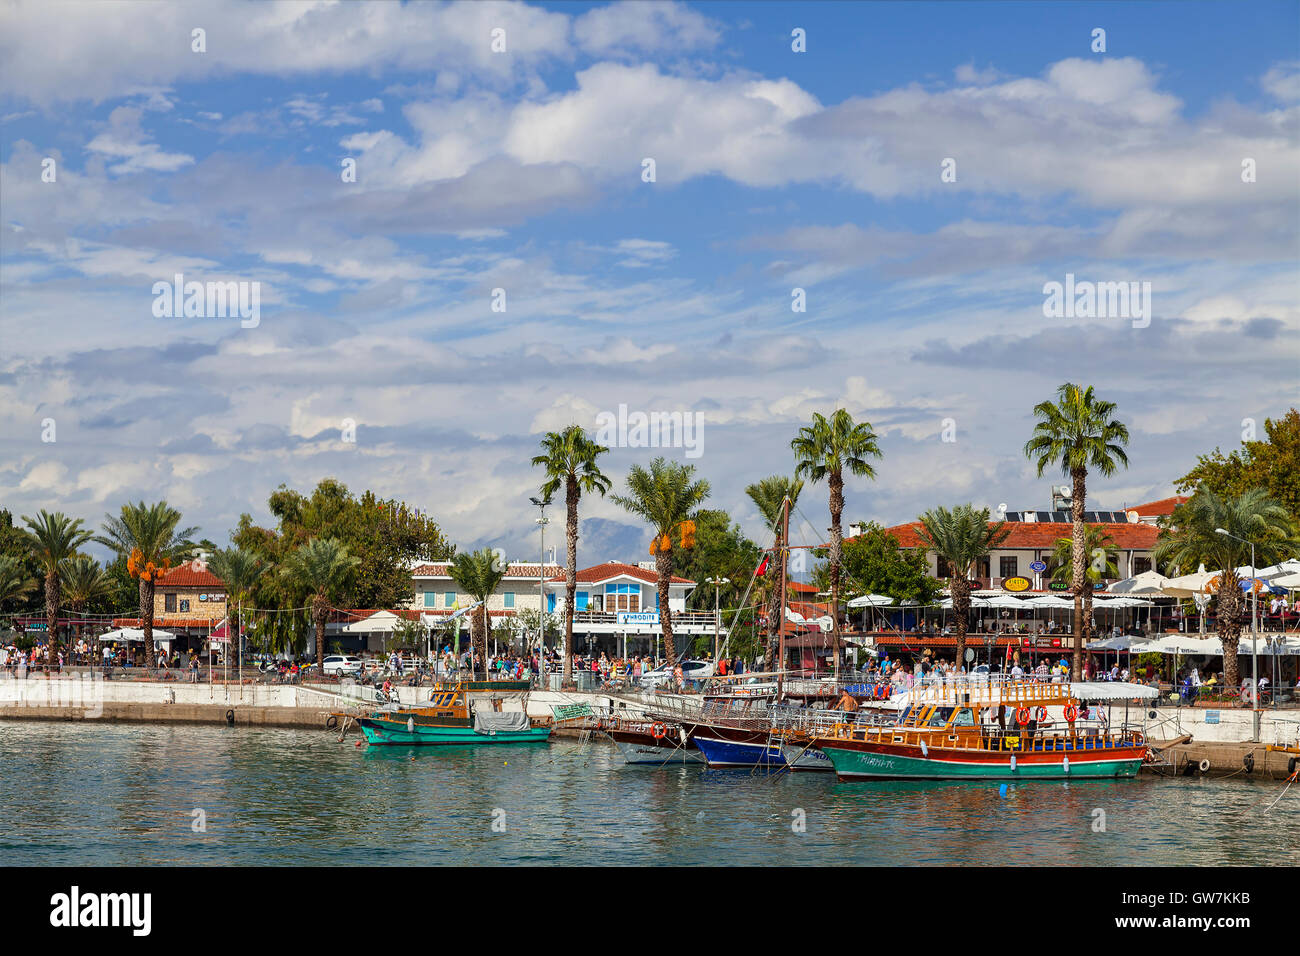 The bustling center of the Turkish resort town of Side, Turkey. Stock Photo